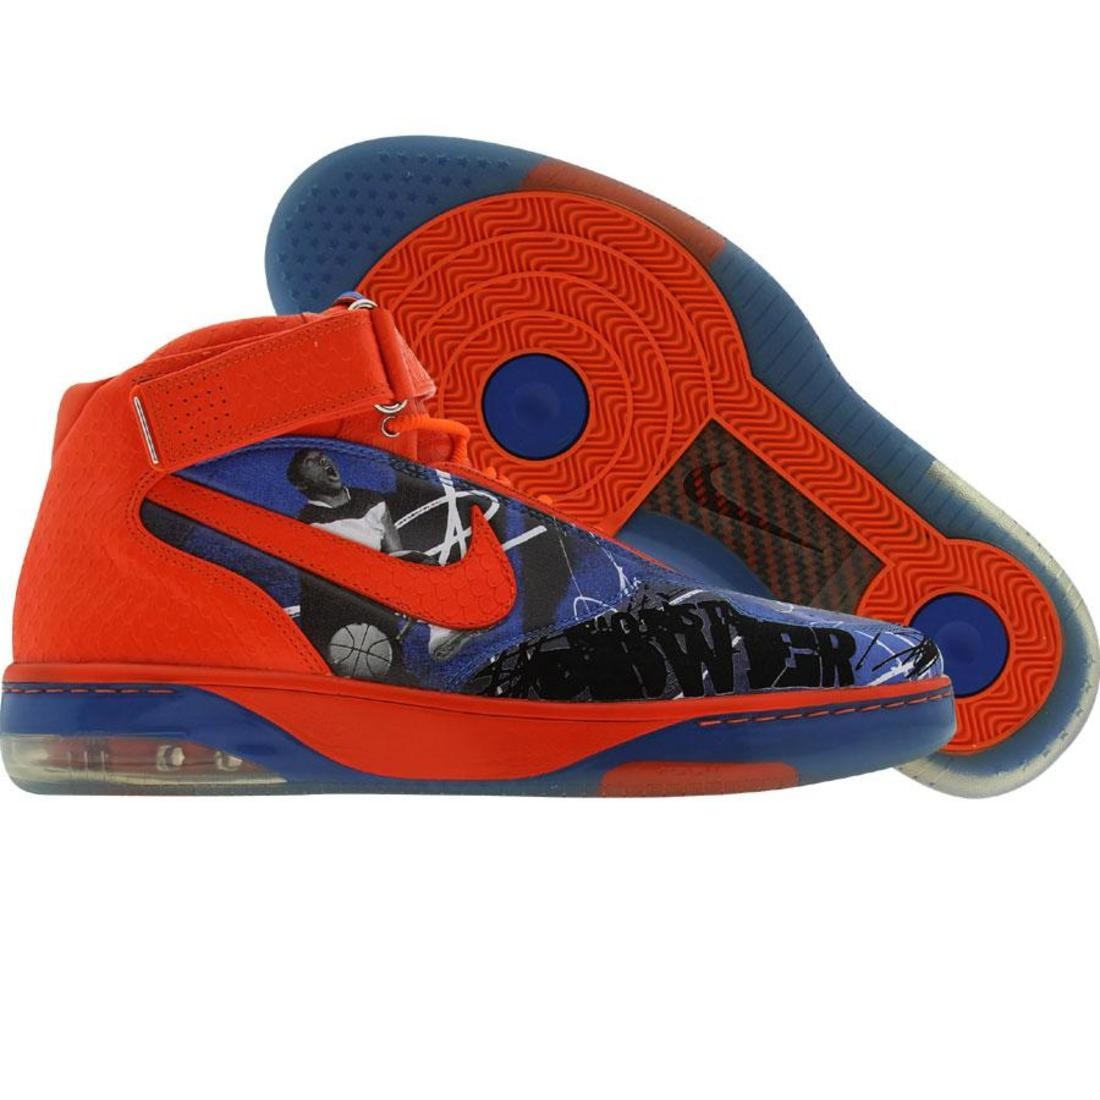 Nike Air Force 25 6 Pack 2007 NBA All Star Release - Nate Robinson Edition (varsity royal / safety orange)